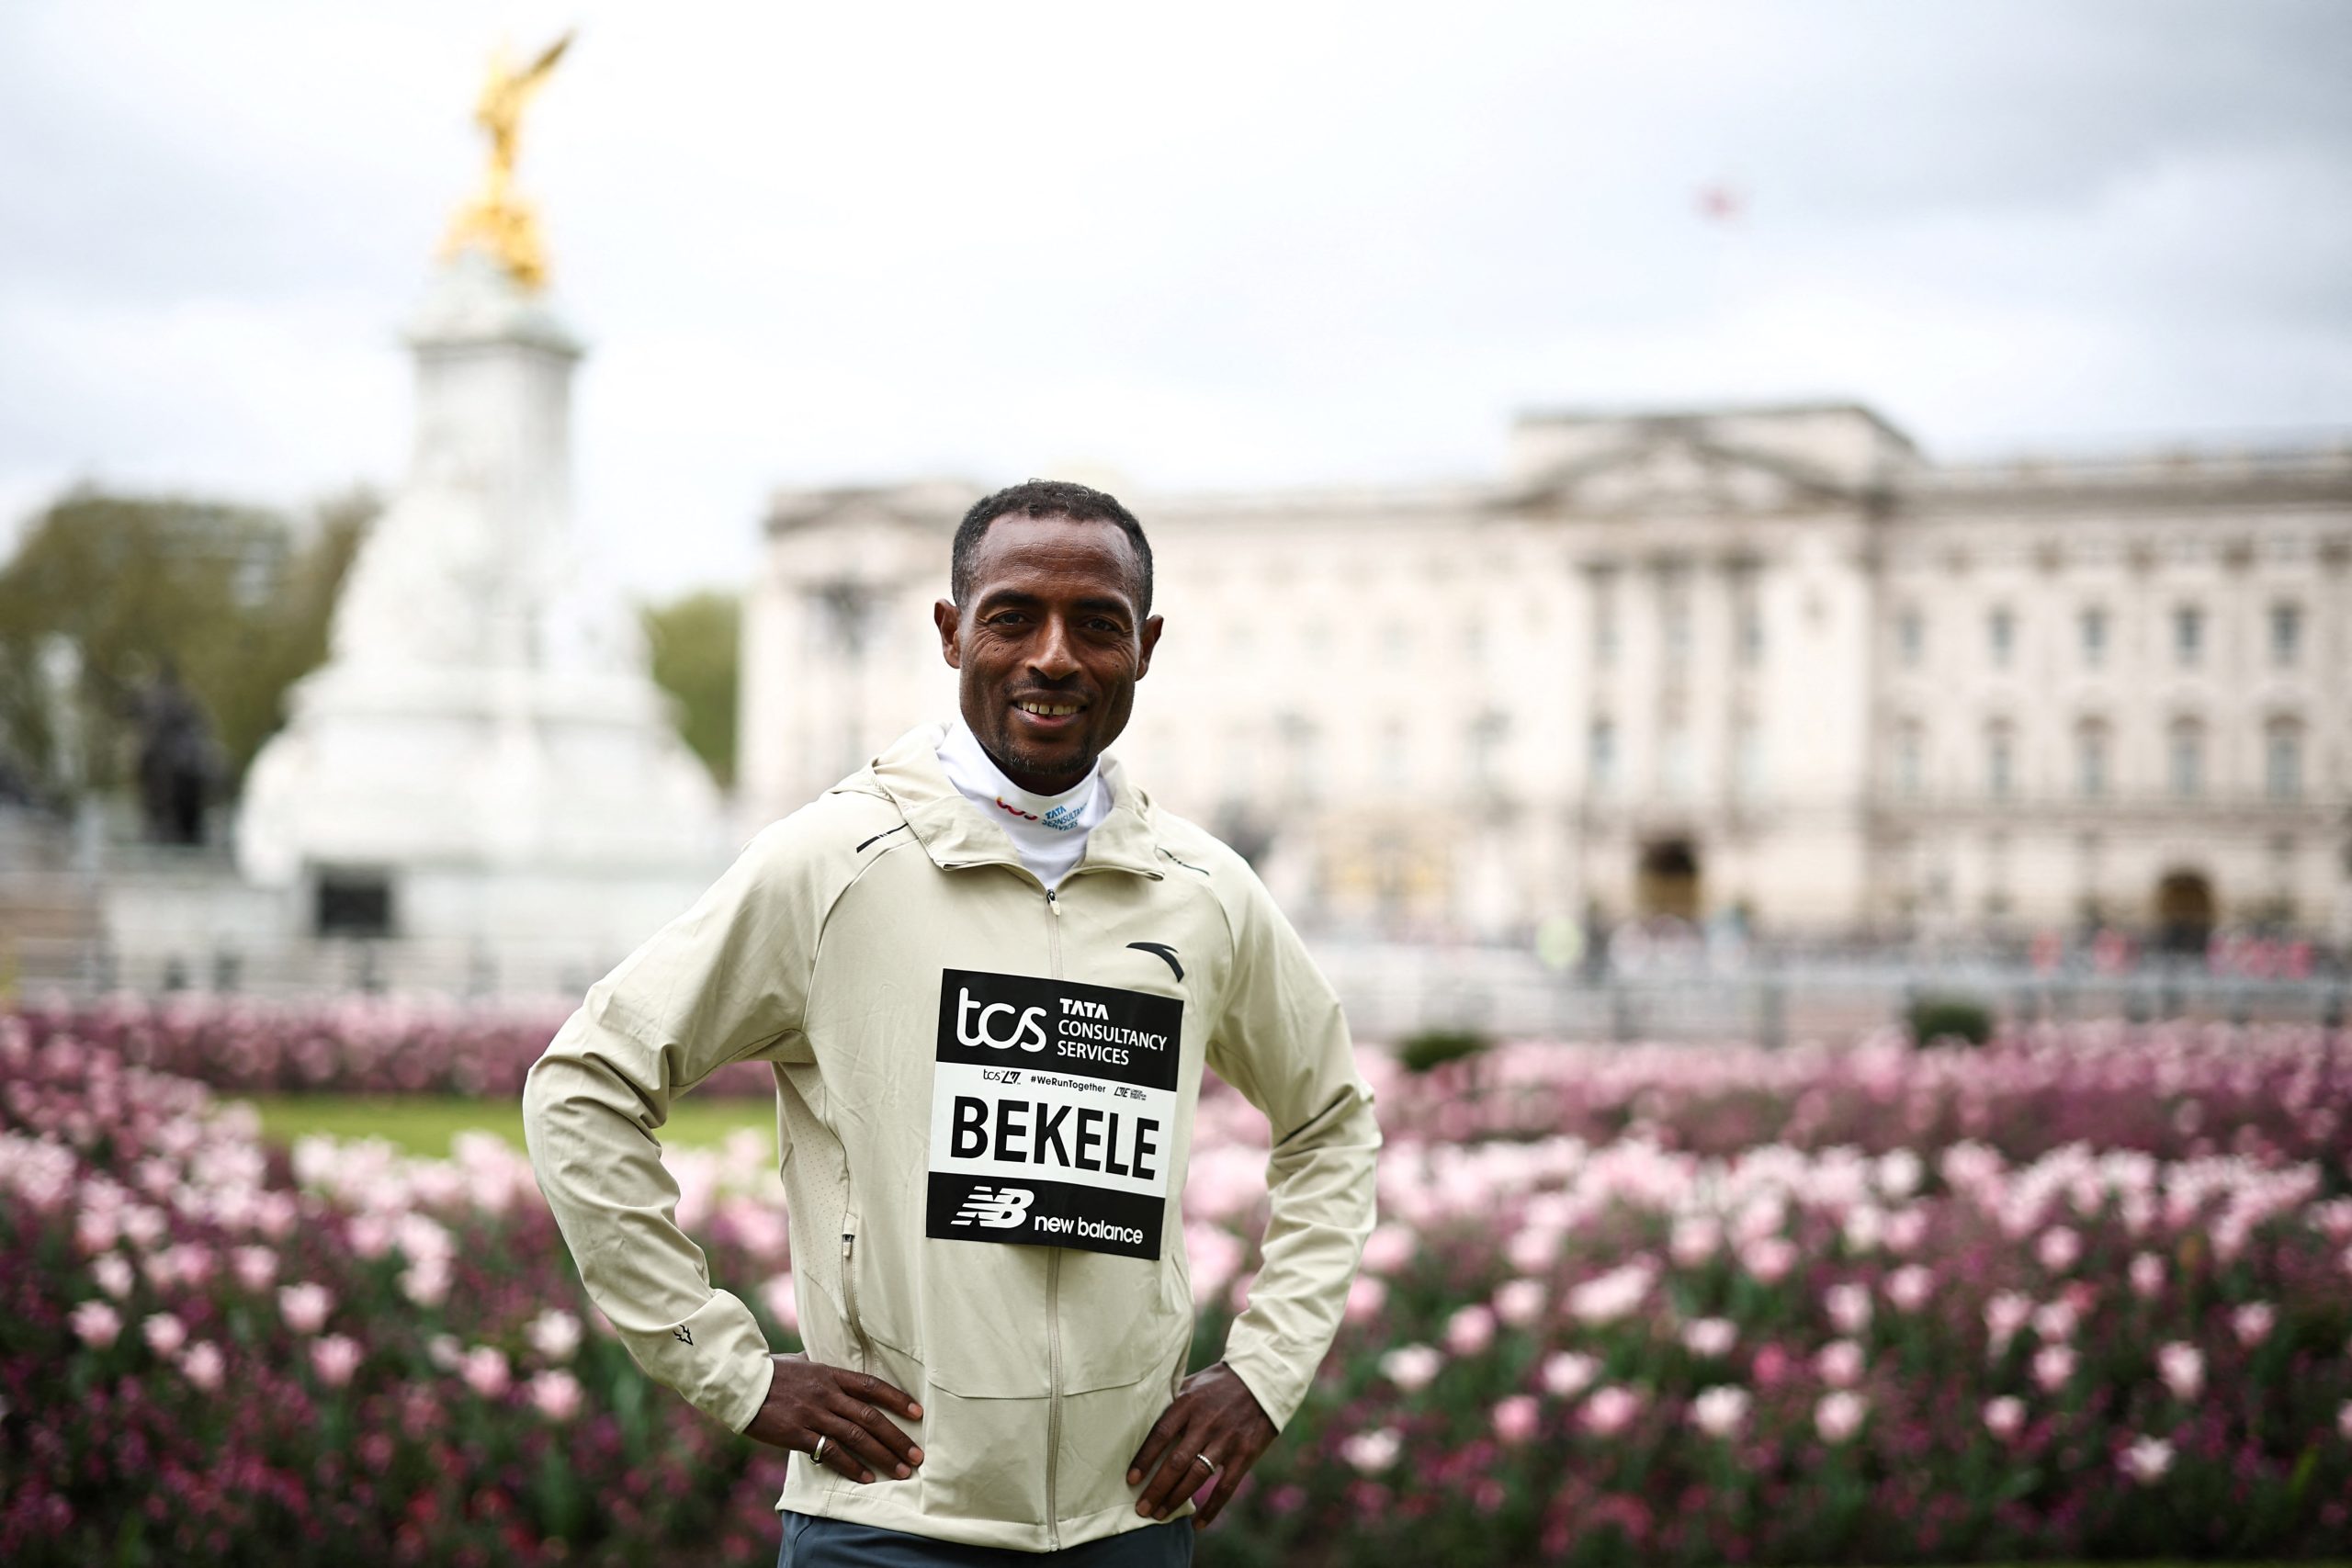 Ethiopian legend Bekele returns to Olympics after 12 years